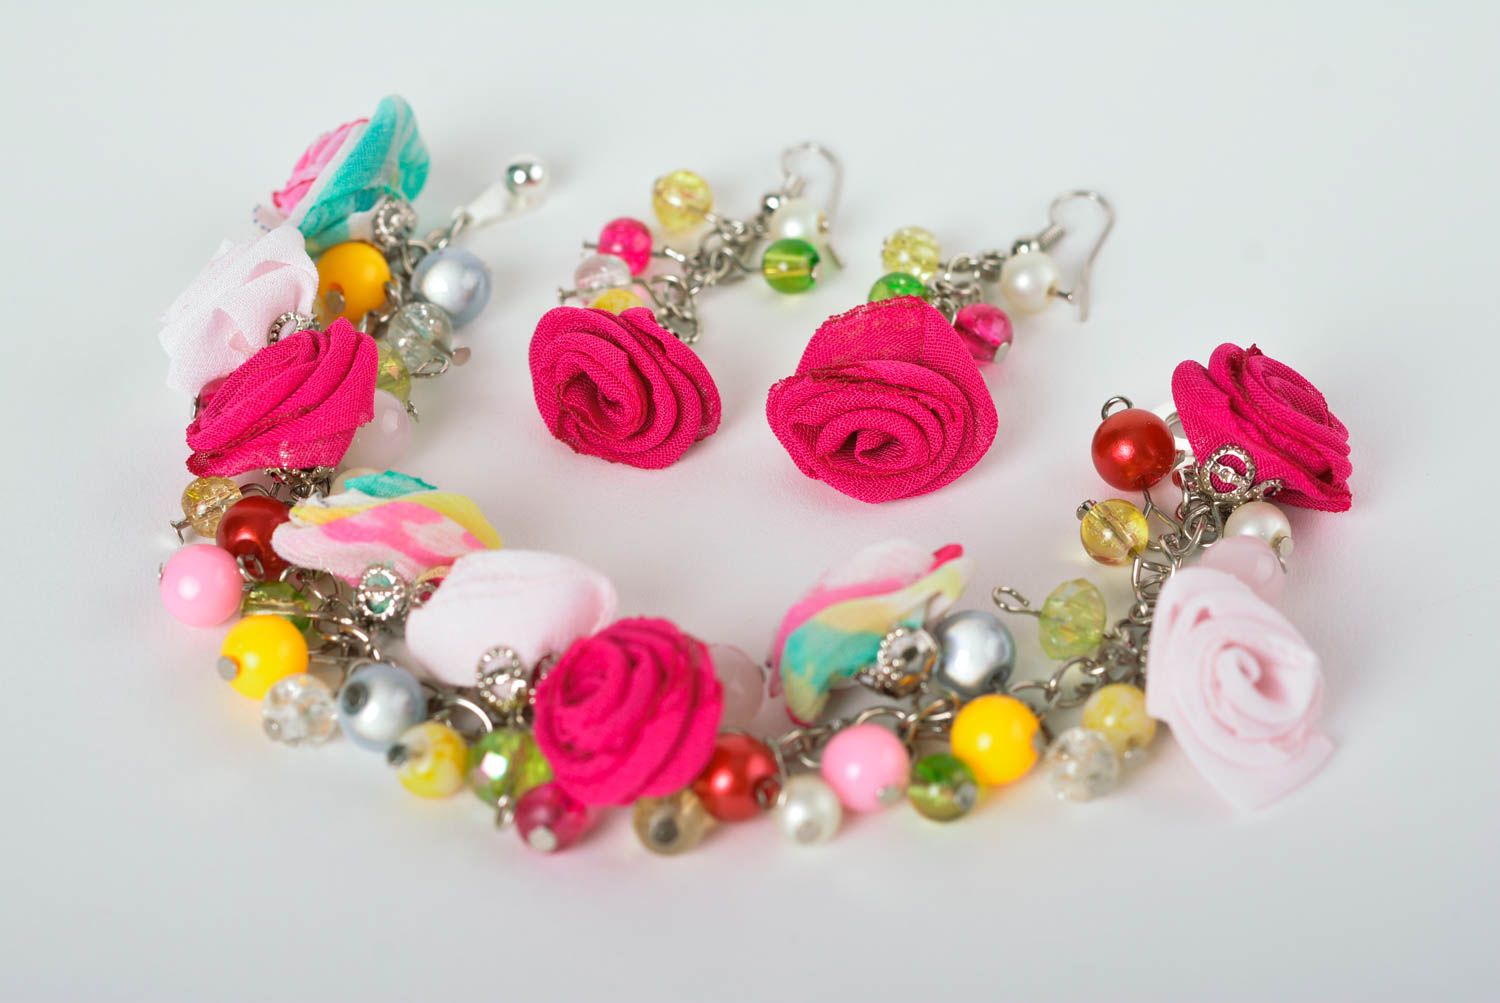 Handmade textile jewelry set fabric bracelet designs flower earrings small gifts photo 1